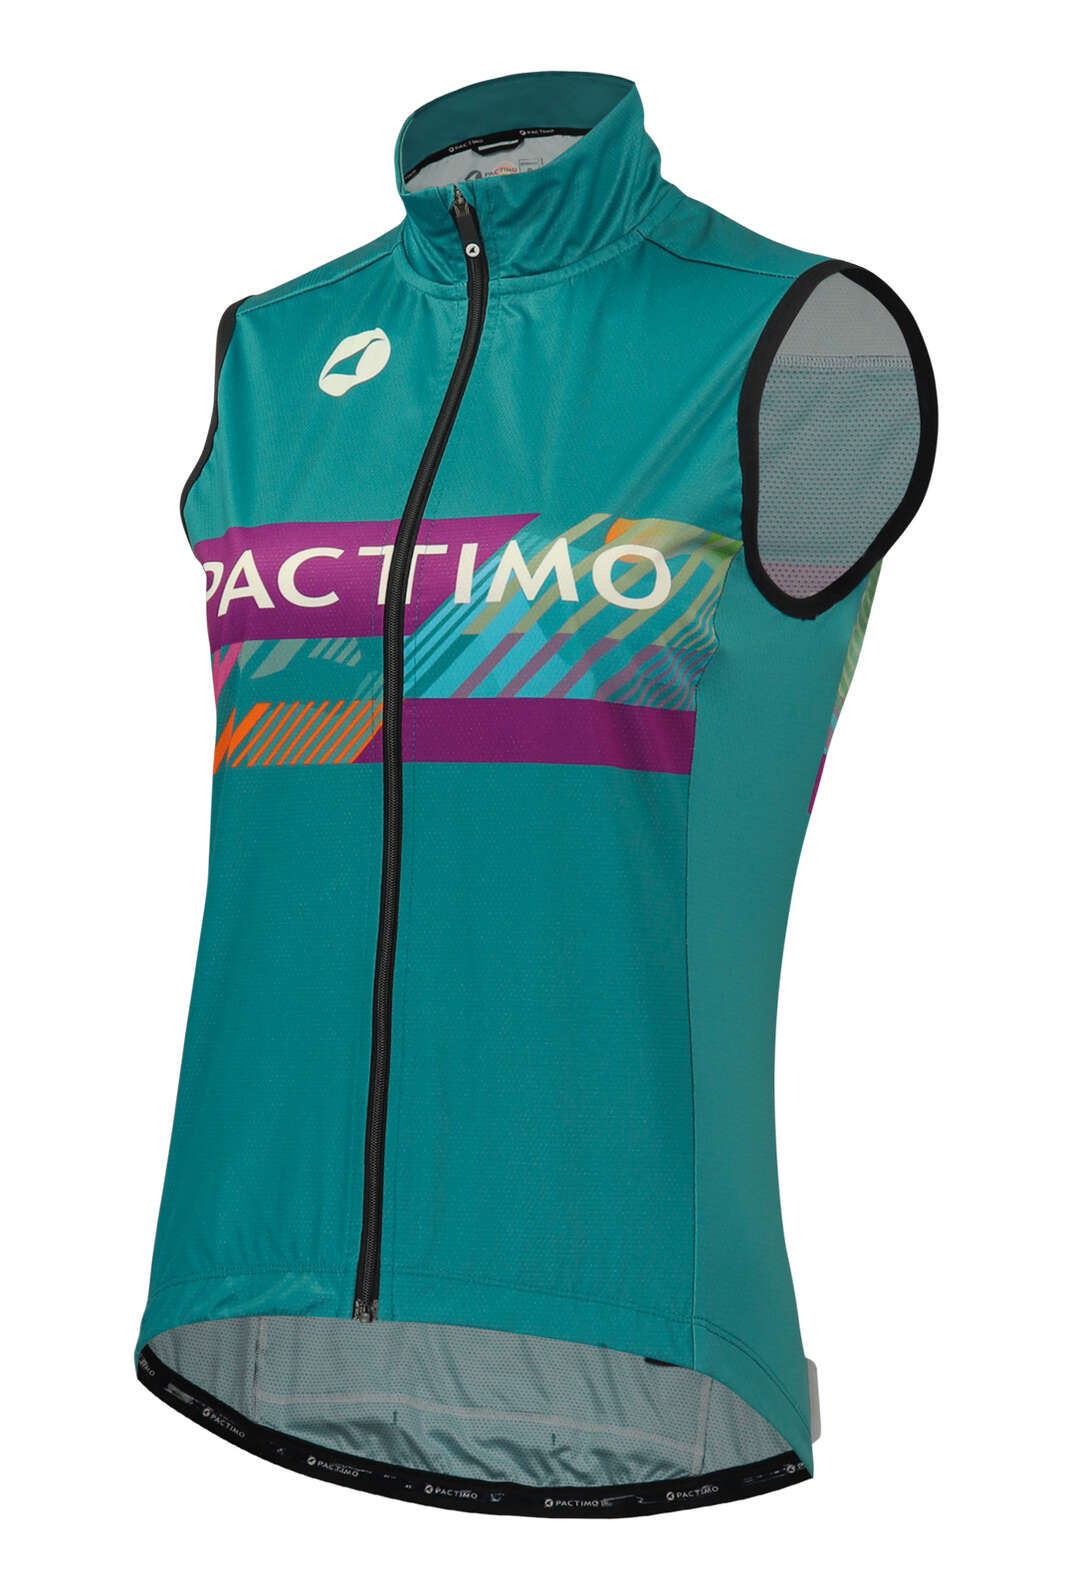 Custom Breckenridge Cycling Vest for Cool Weather